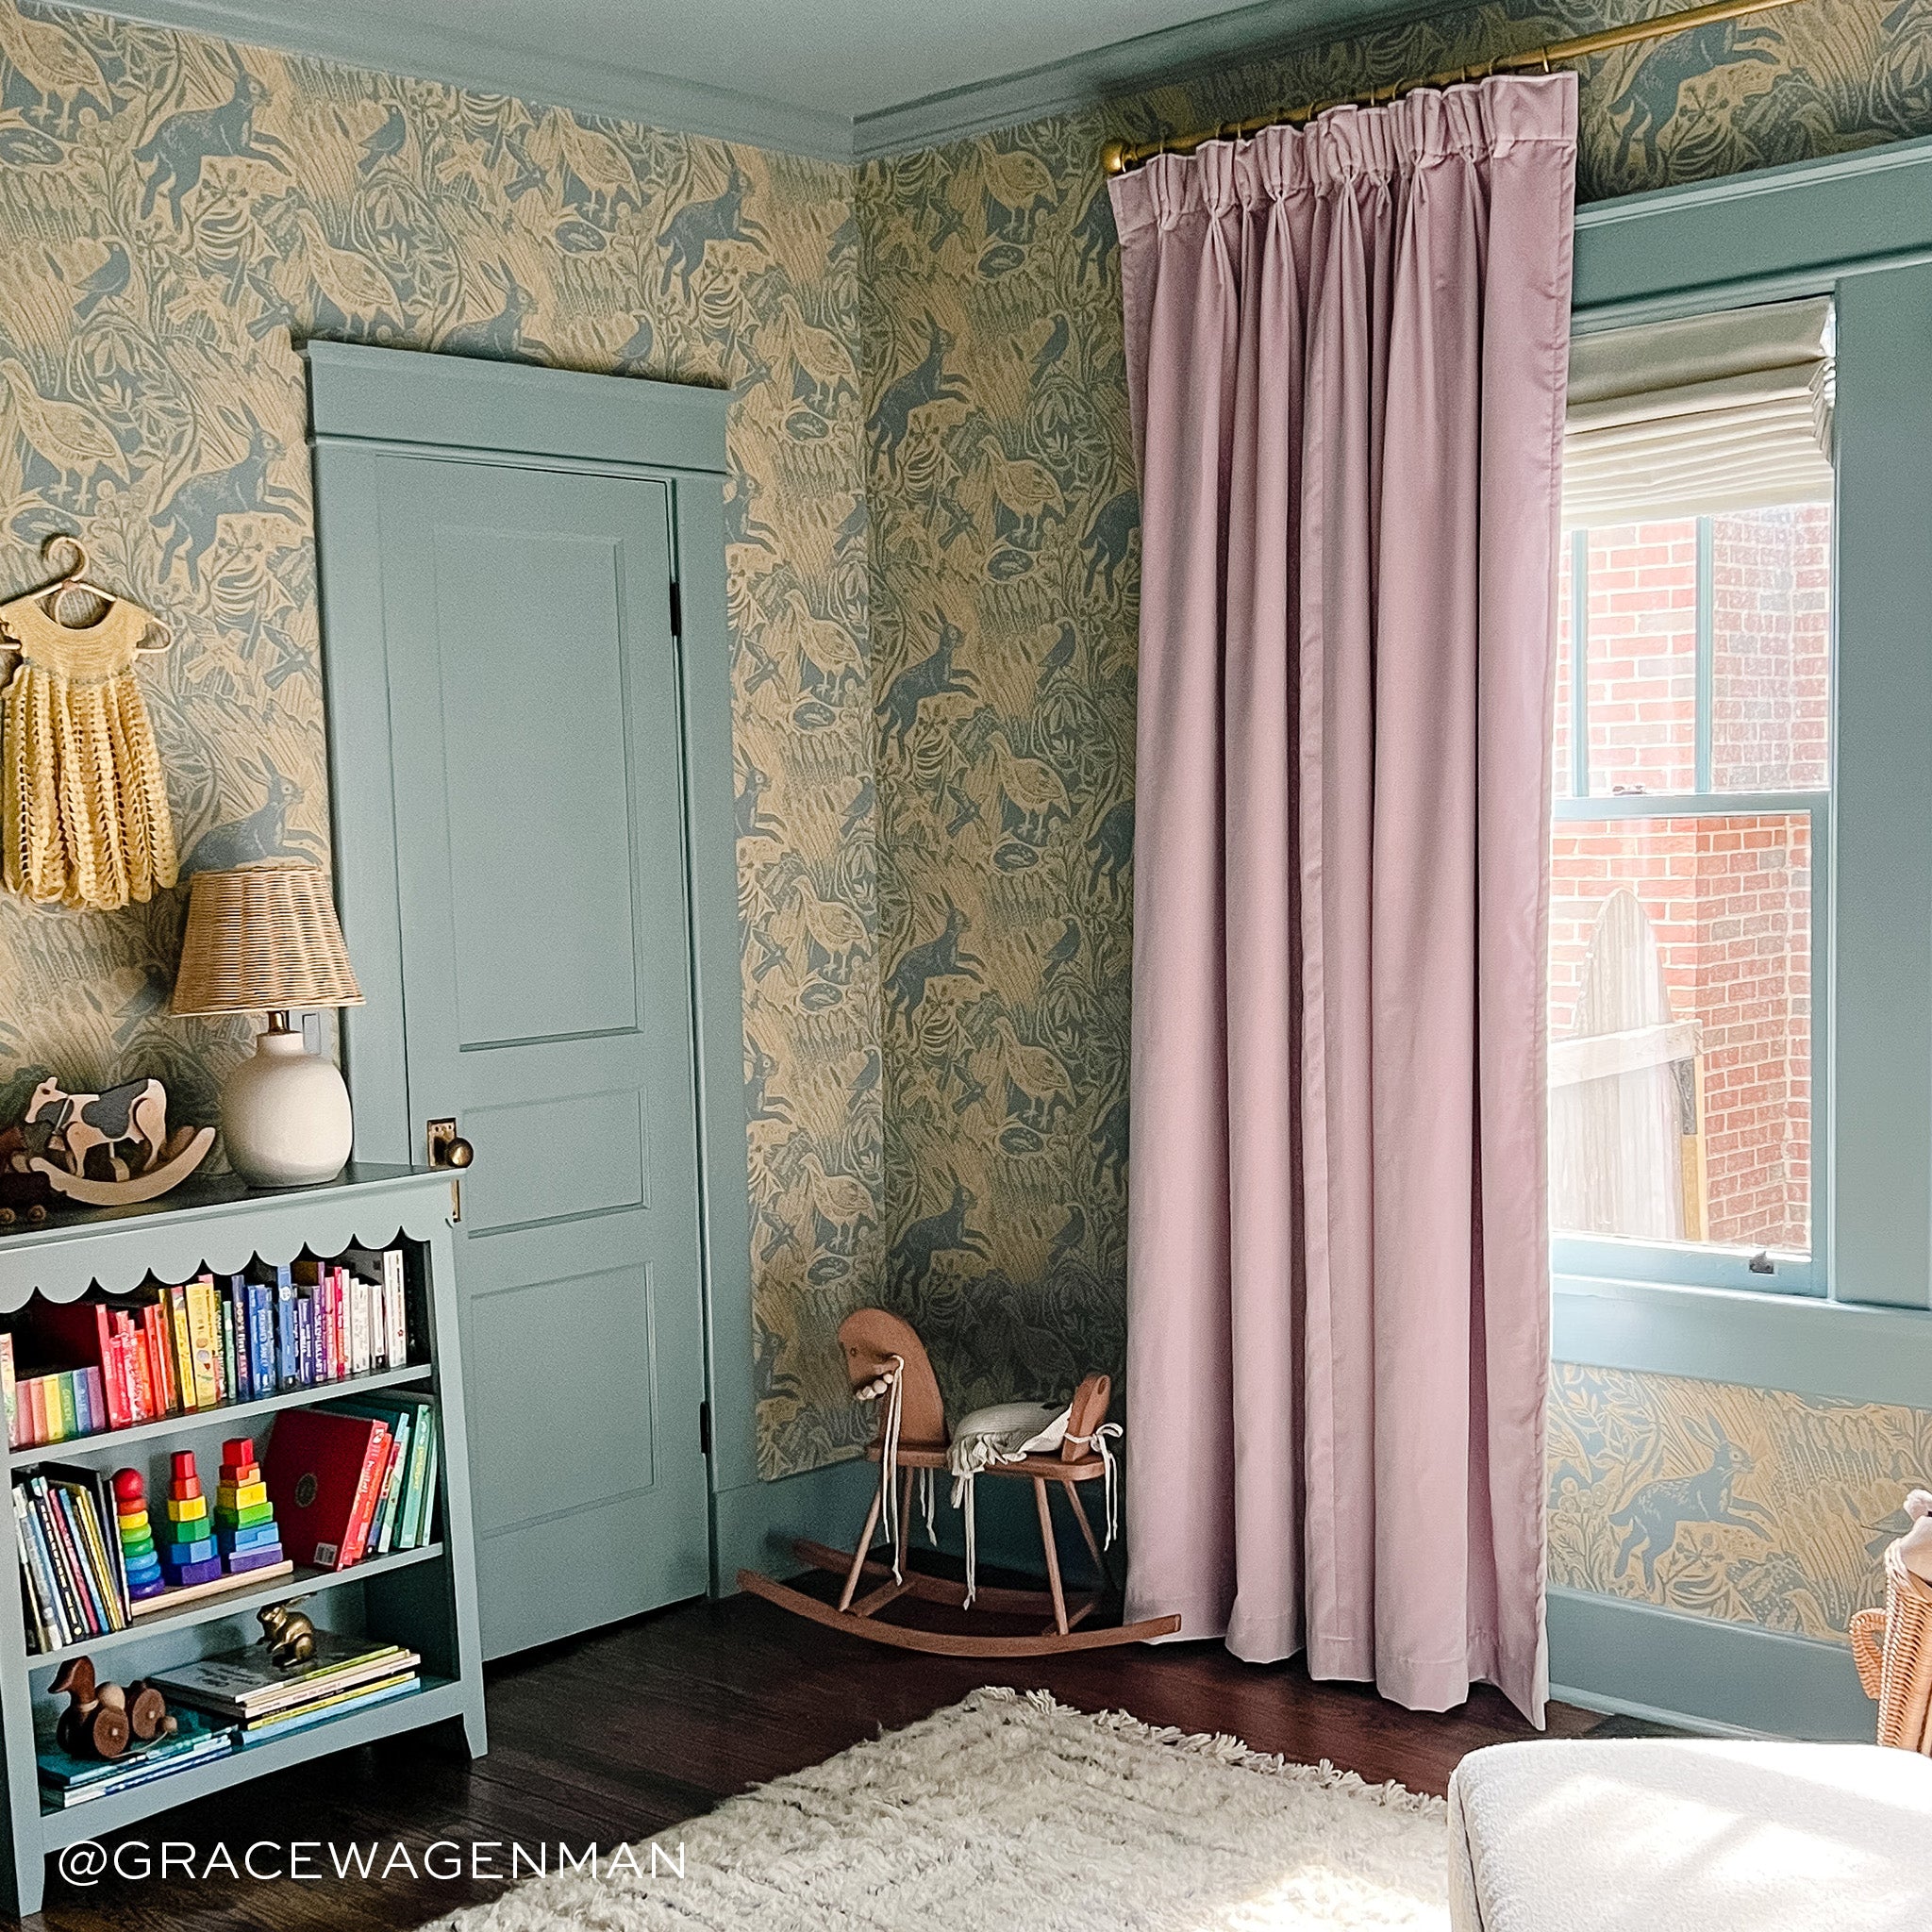 Bedroom corner styled with Lilac Velvet Curtains next to illuminated window with Animal printed wallpaper. Photo taken by Grace Wagenman